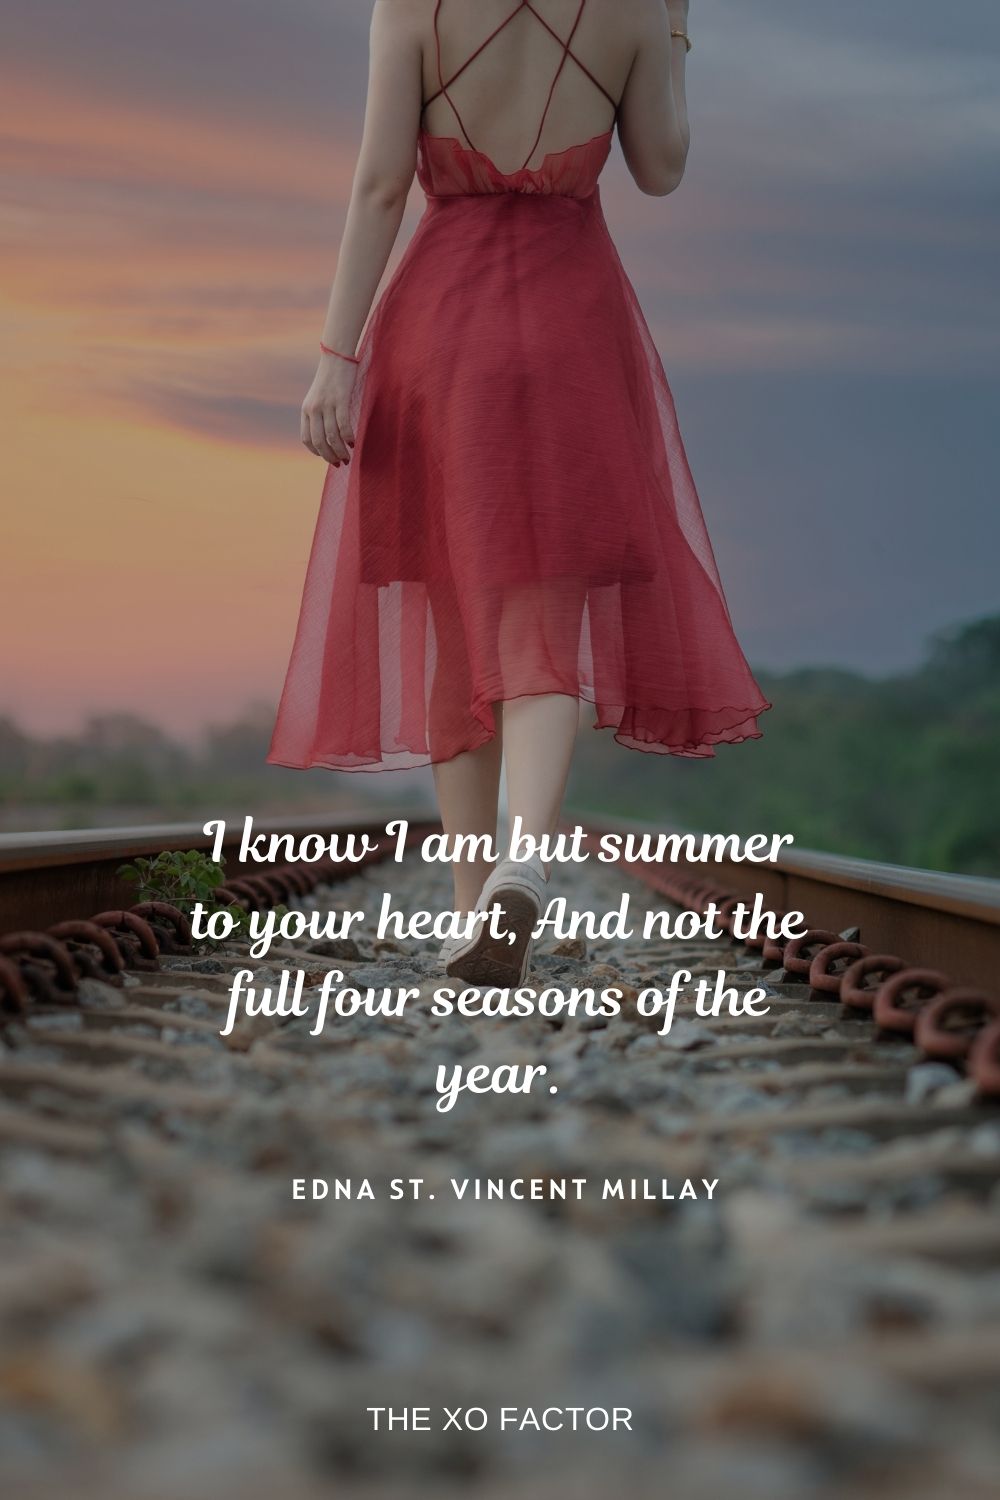 I know I am but summer to your heart, And not the full four seasons of the year.  Edna St. Vincent Millay